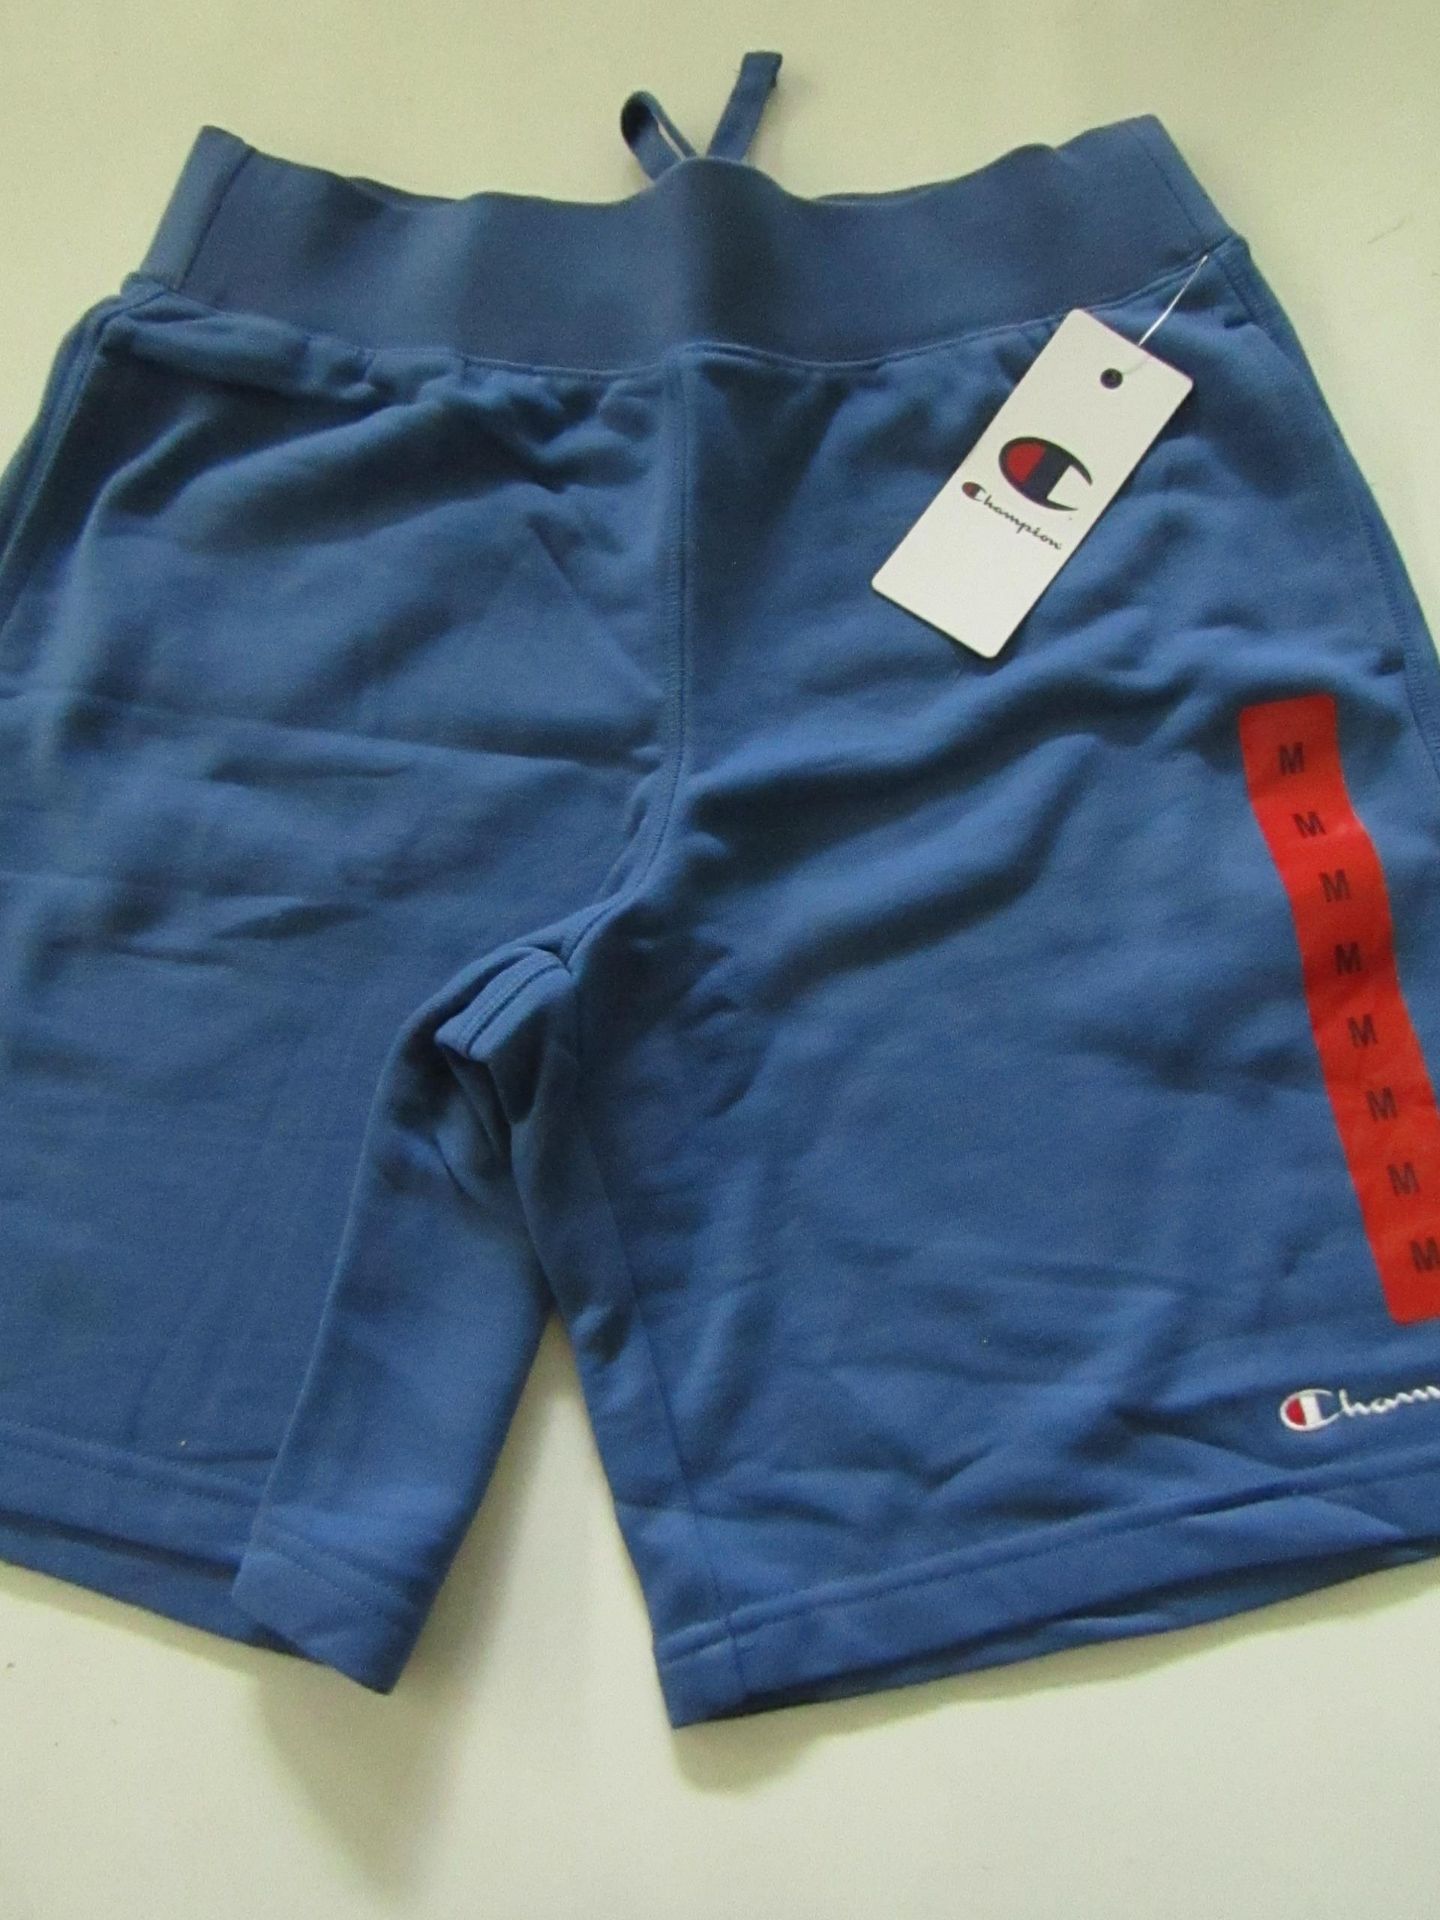 Champion - Mens Shorts Blue - Size Medium - New With Tags. RRP £34.99